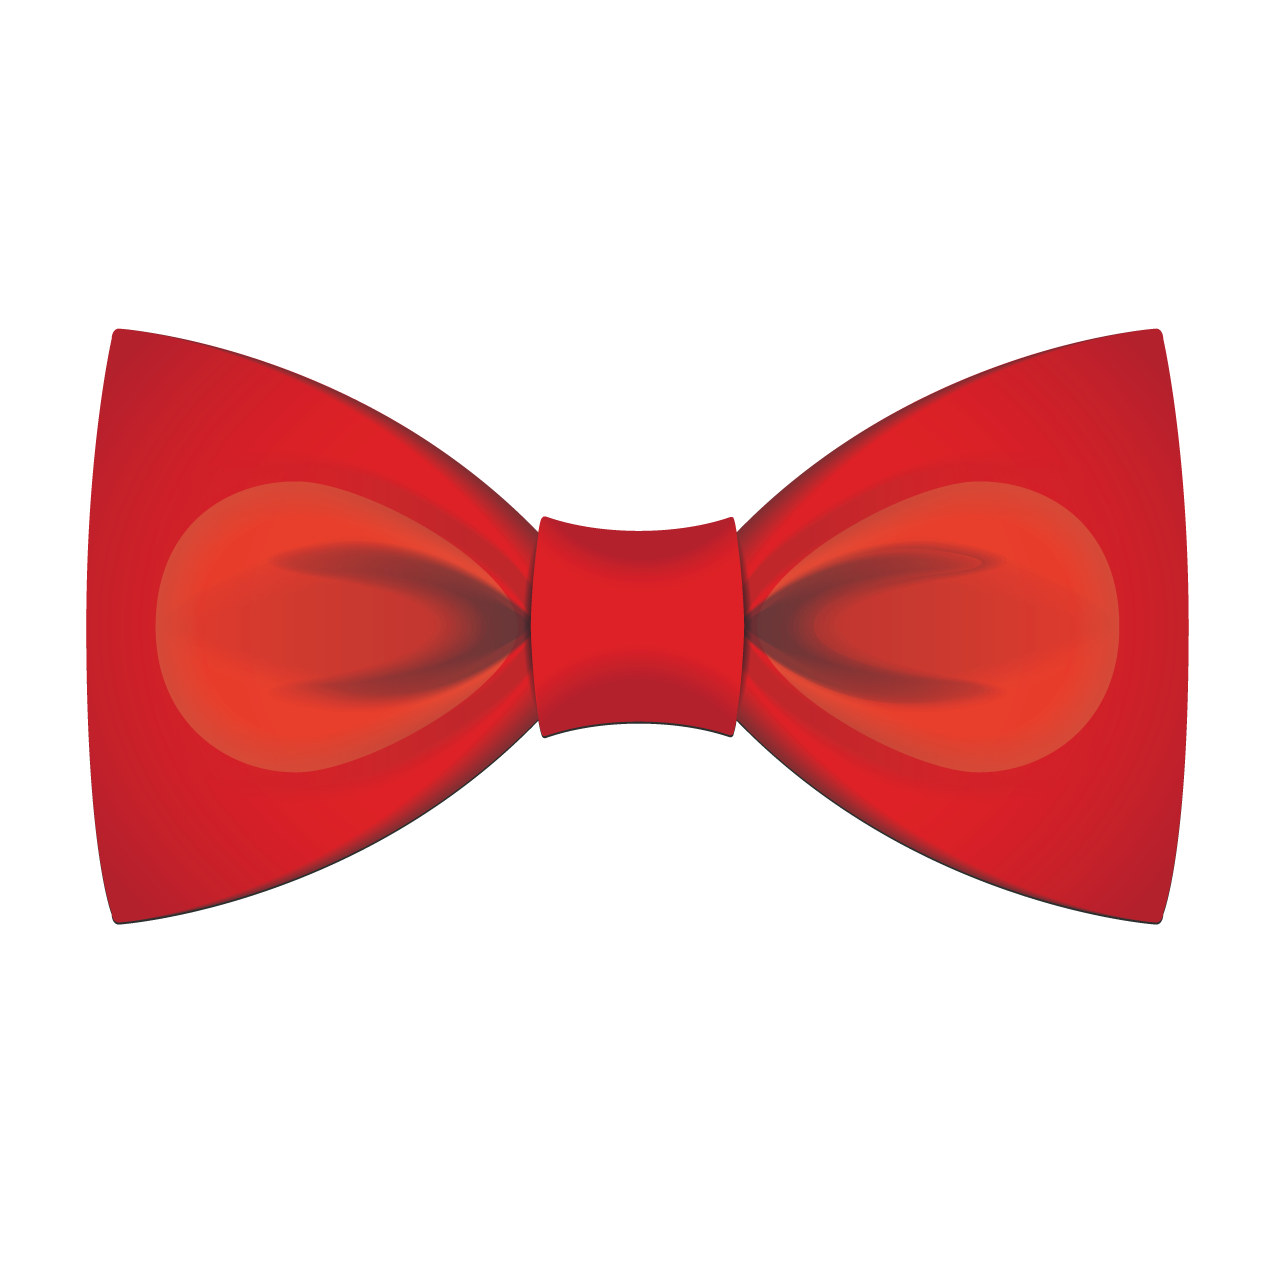 Bow tie Font - Beautiful red bow png download - 1276*1276 - Free ...